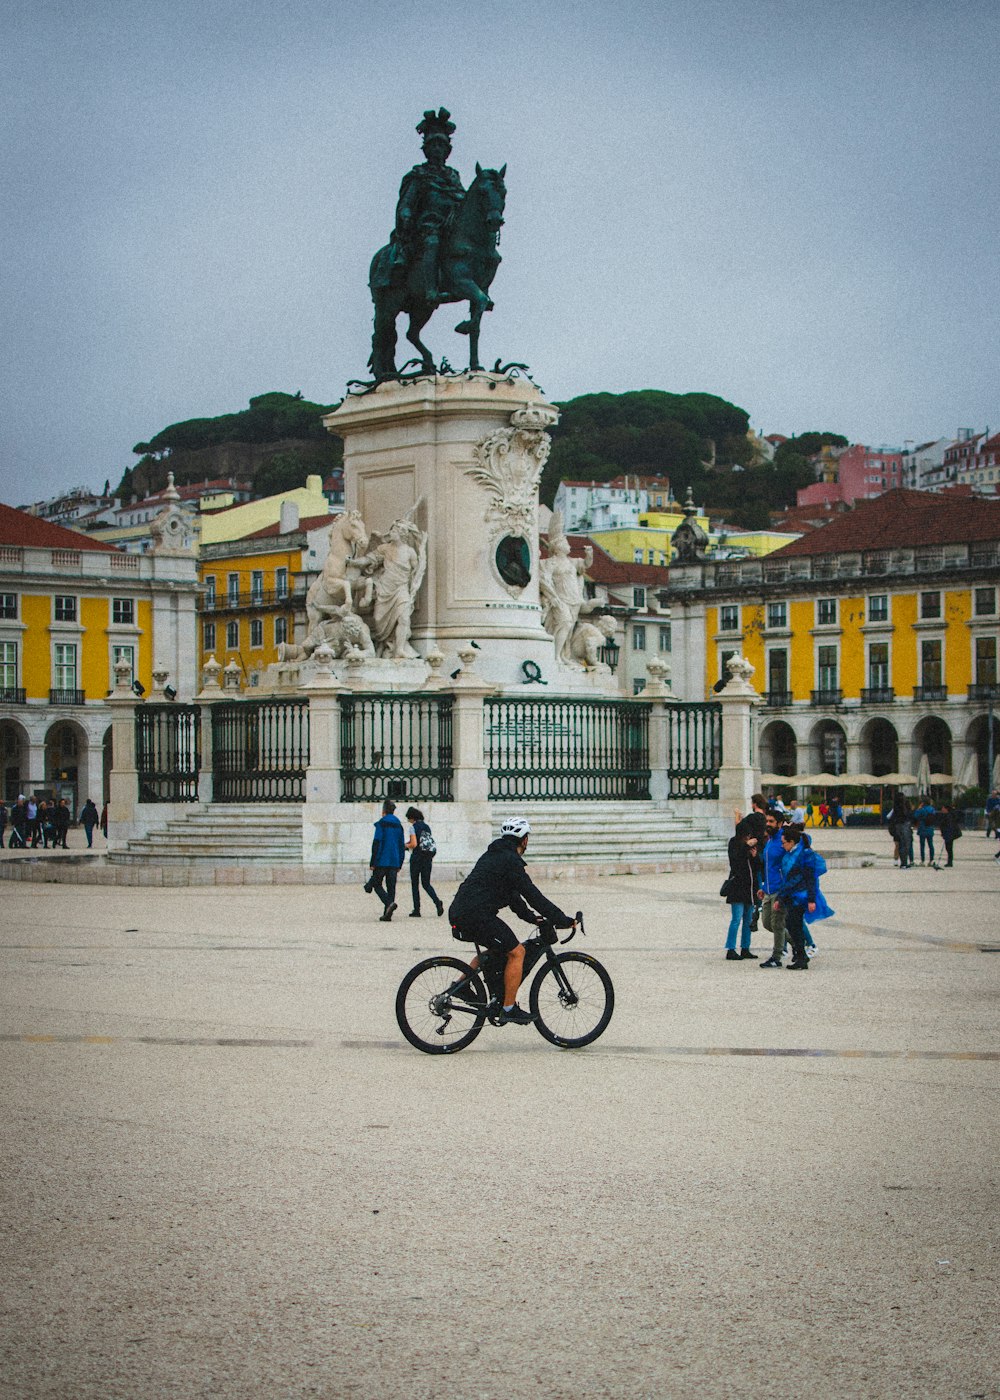 a person riding a bike in front of a statue